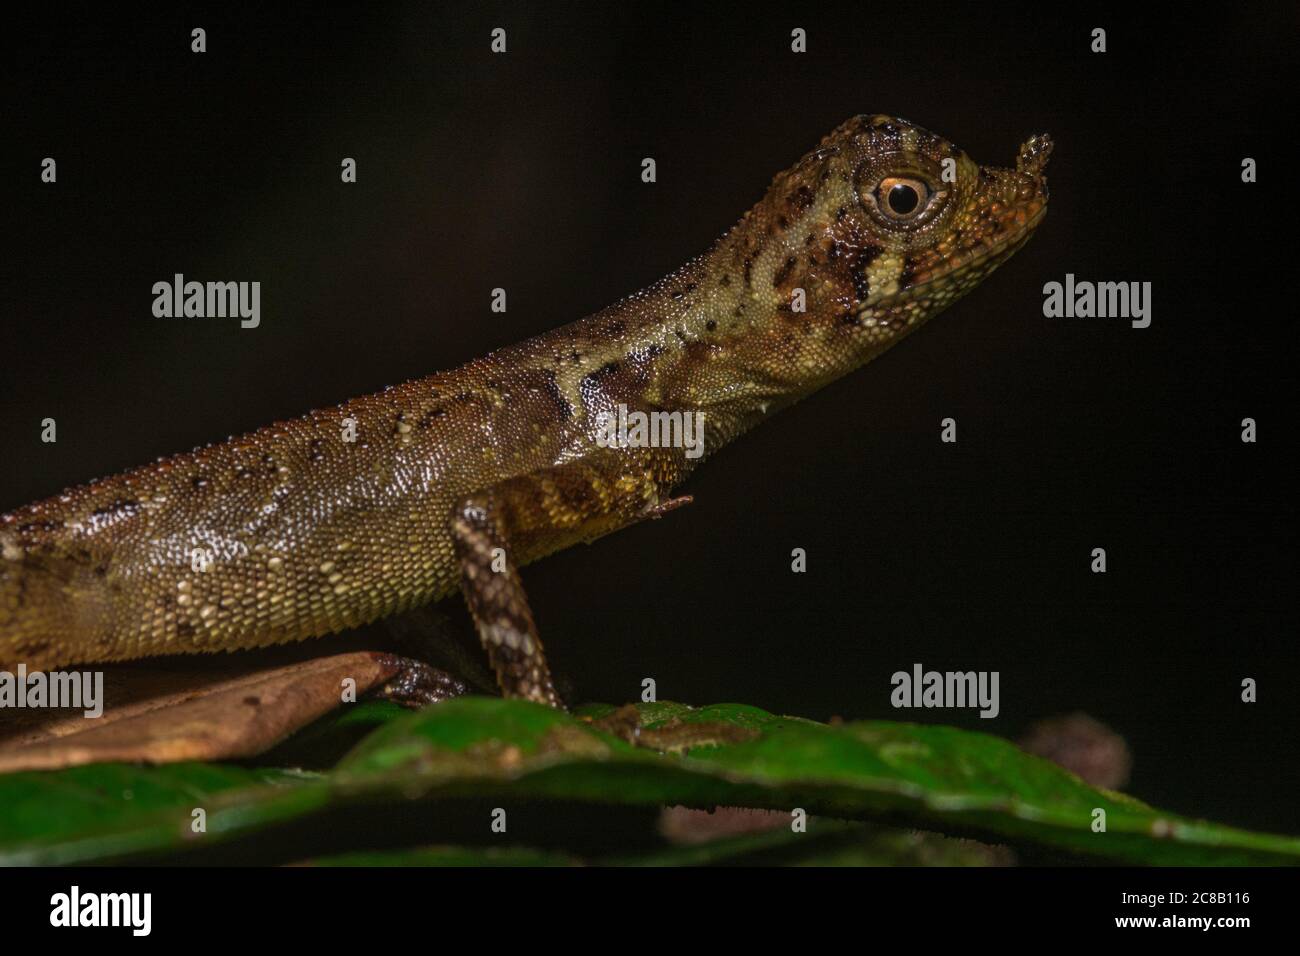 The ornate earless agama (Aphaniotis ornata) a lizard species endemic to the jungles of Borneo. Stock Photo